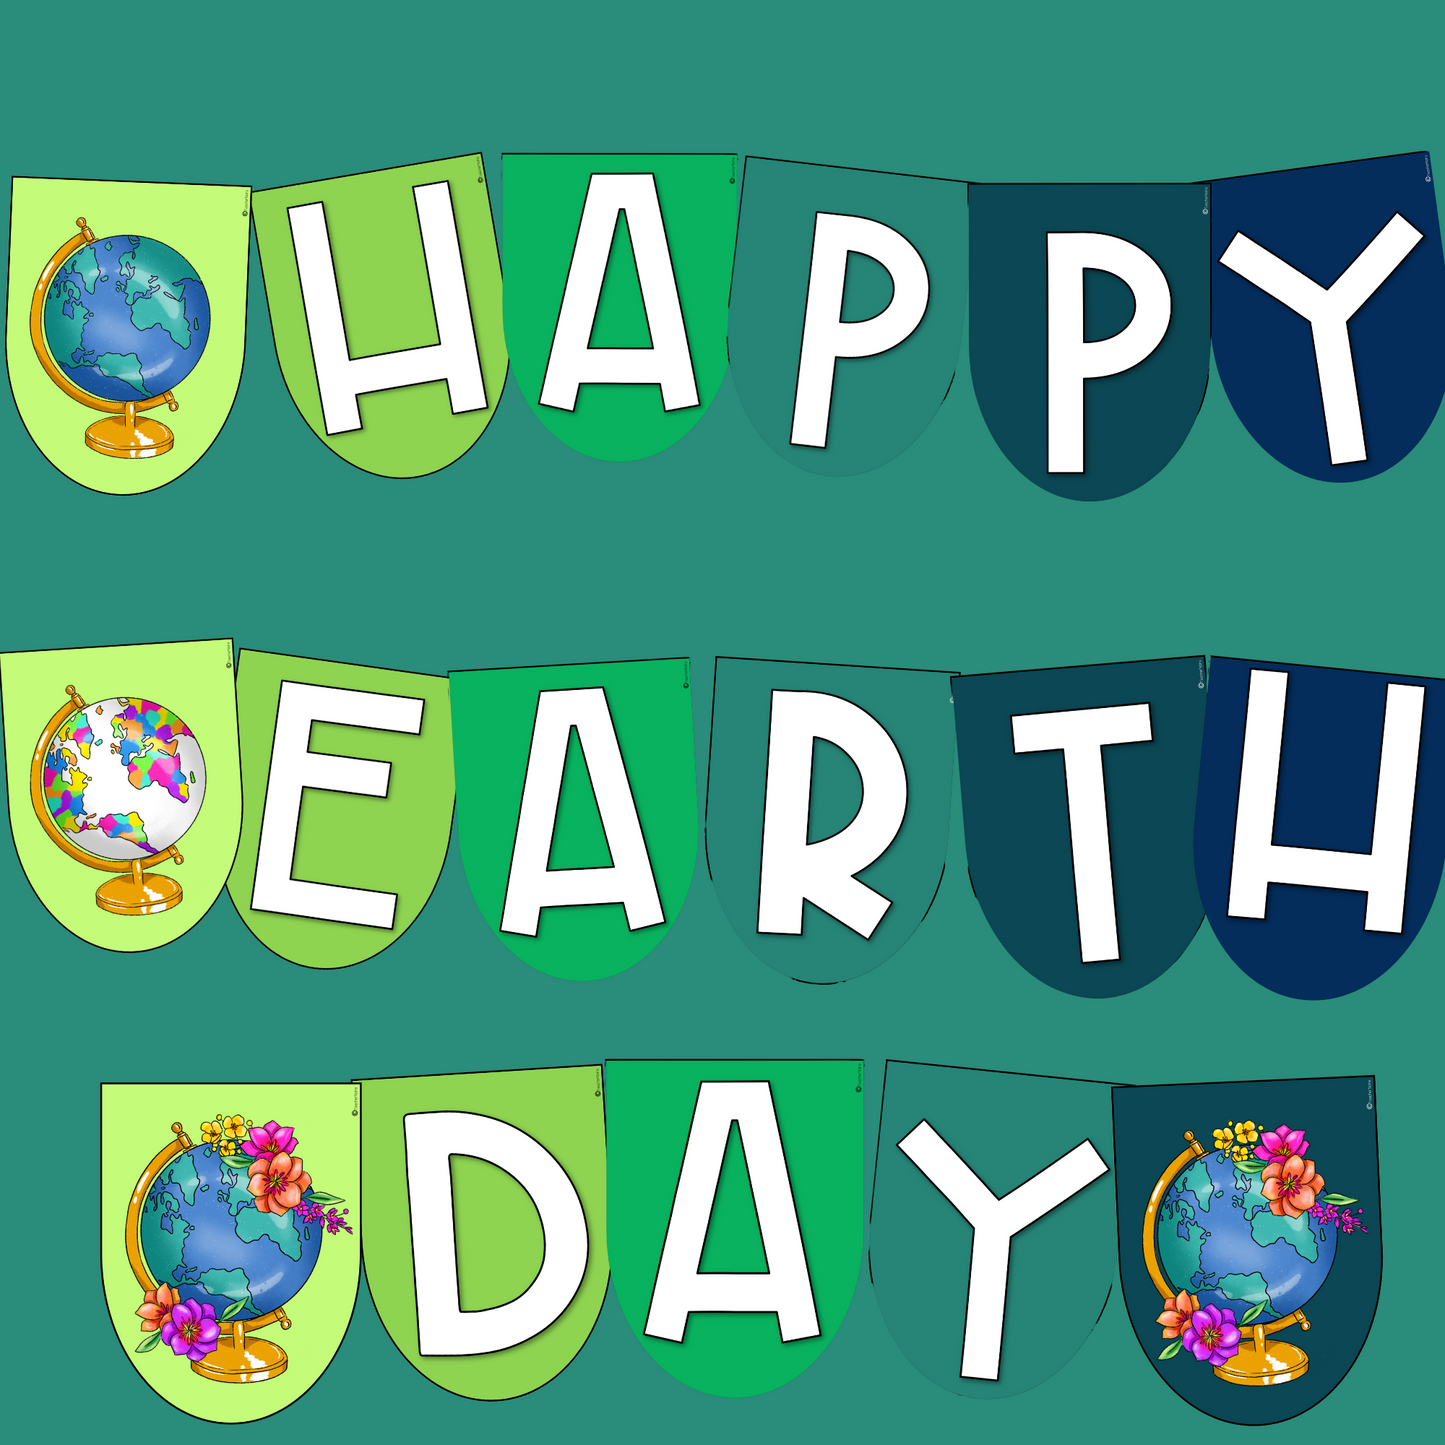 Earth Day Banner